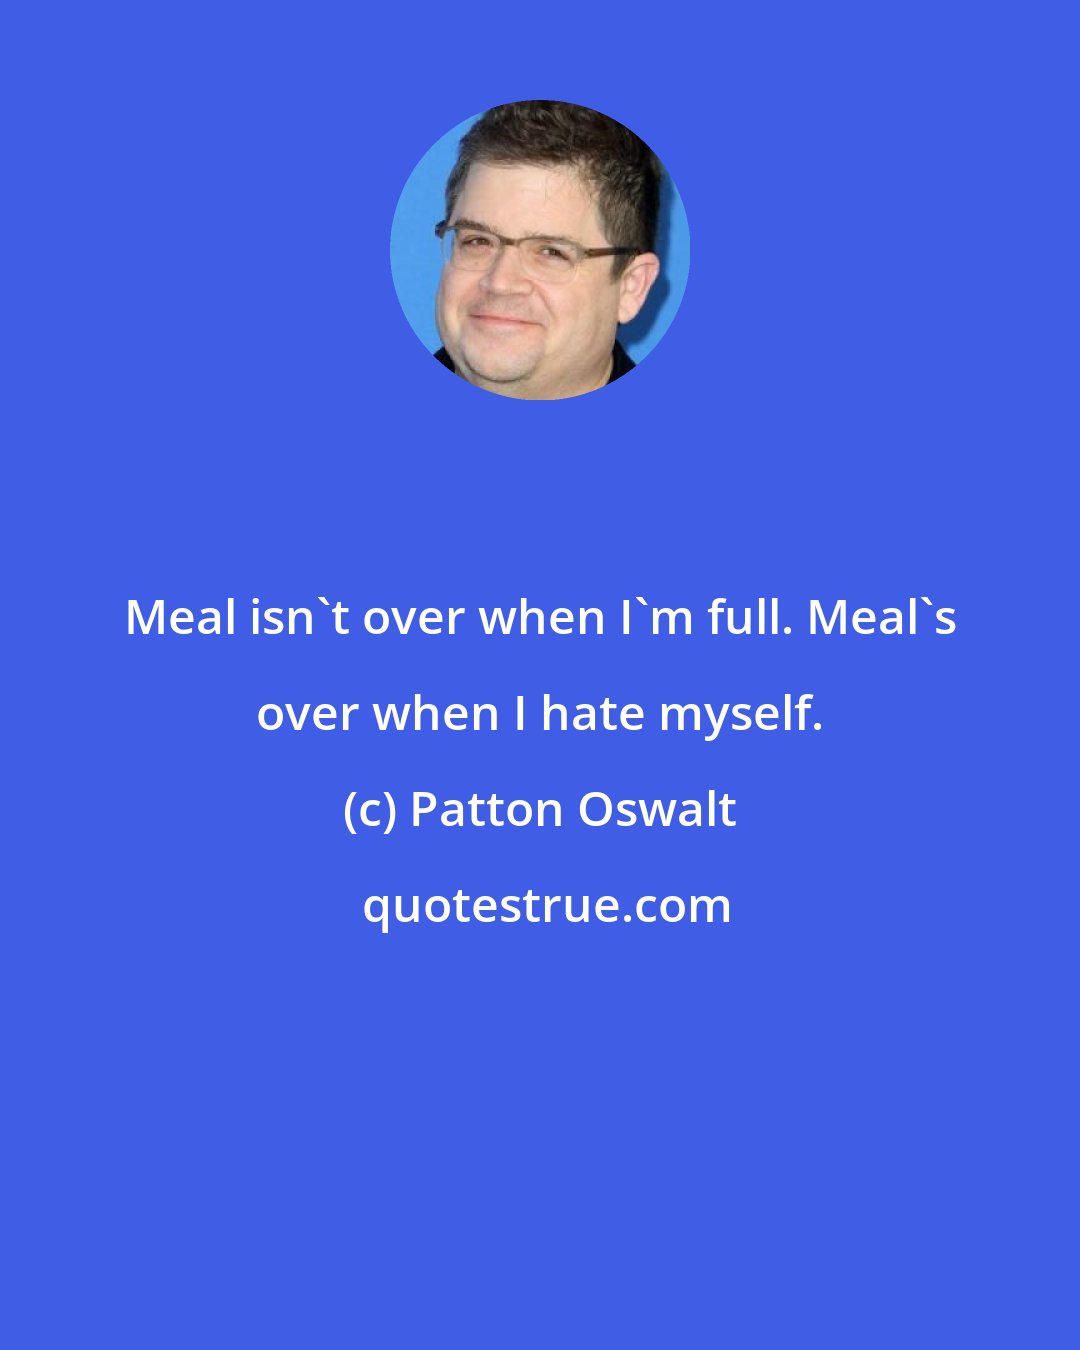 Patton Oswalt: Meal isn't over when I'm full. Meal's over when I hate myself.